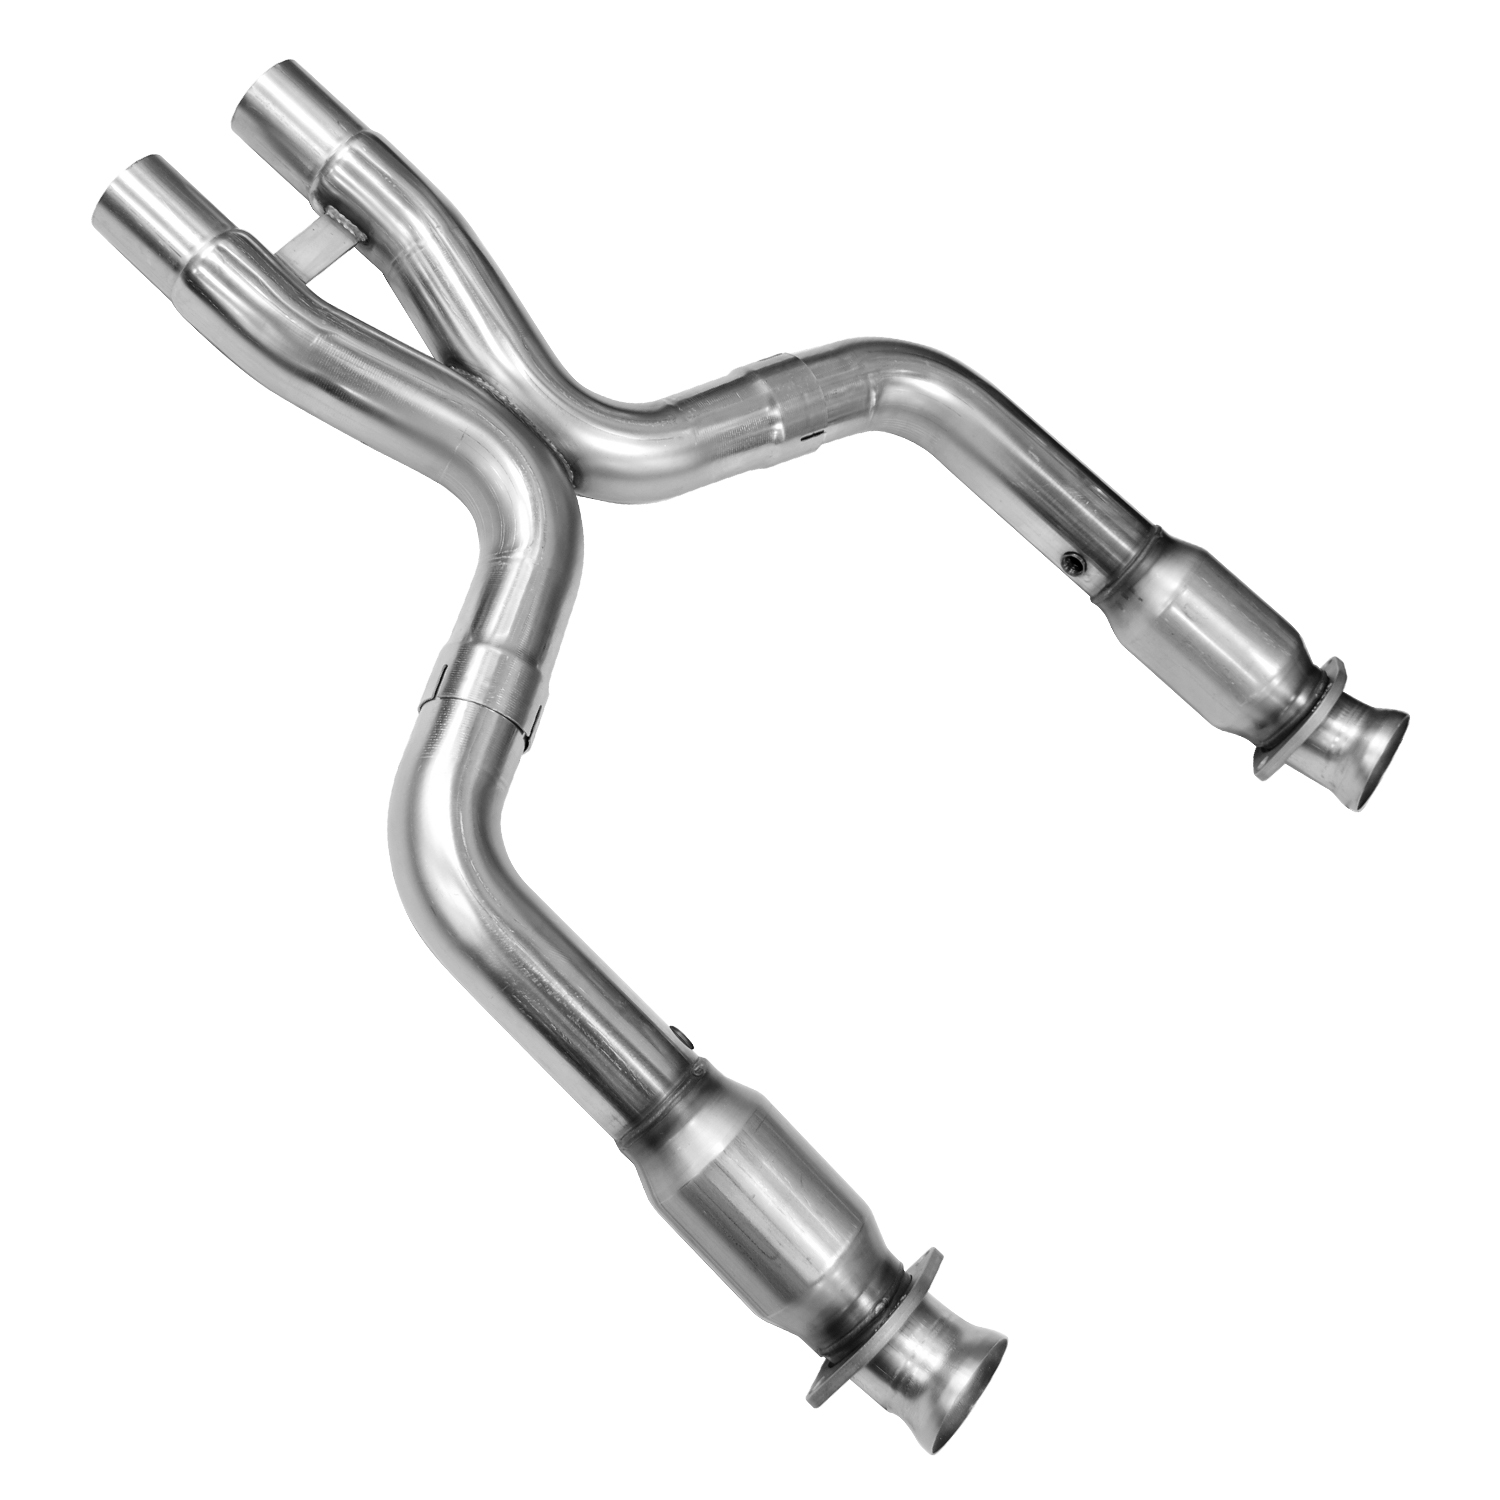 Catted X-Pipe 3 x 2.75" OEM Outlet Must Be Use w/Kooks Headers 49 State EPA Legal 11-14 Mustang GT 5.0L 4V